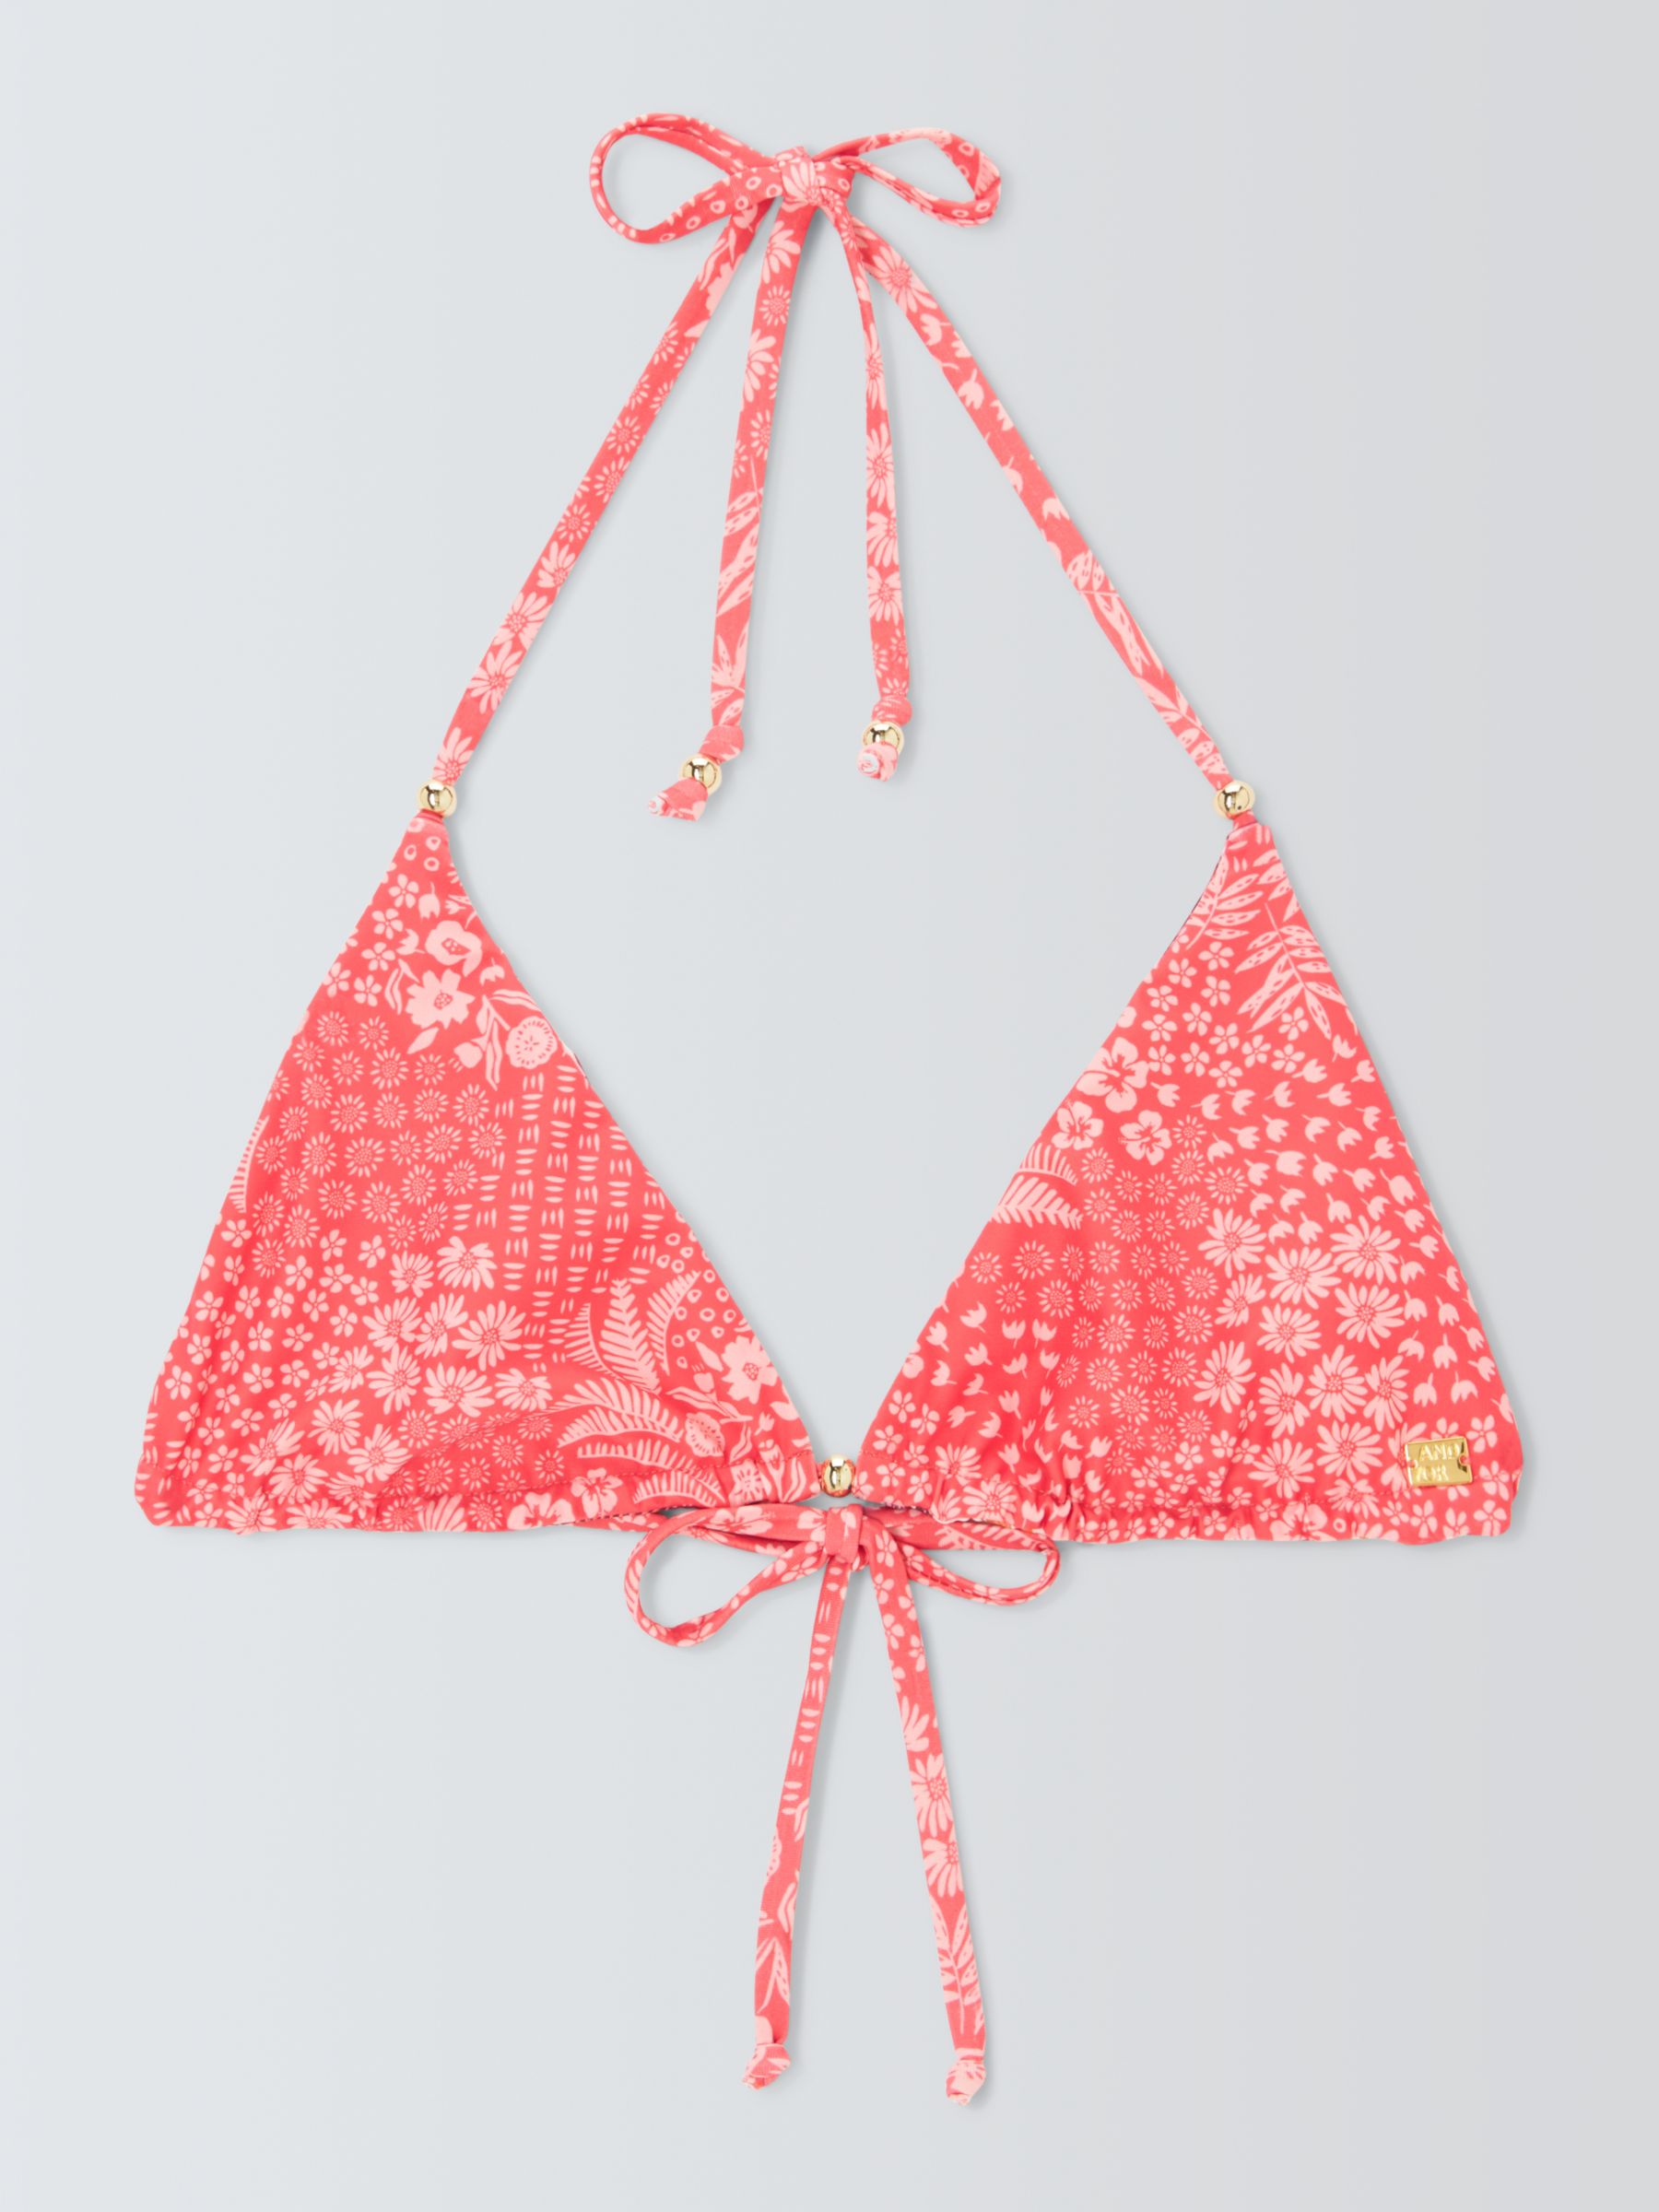 AND/OR Tropical Patchwork Triangle Bikini Top, Pink, 14